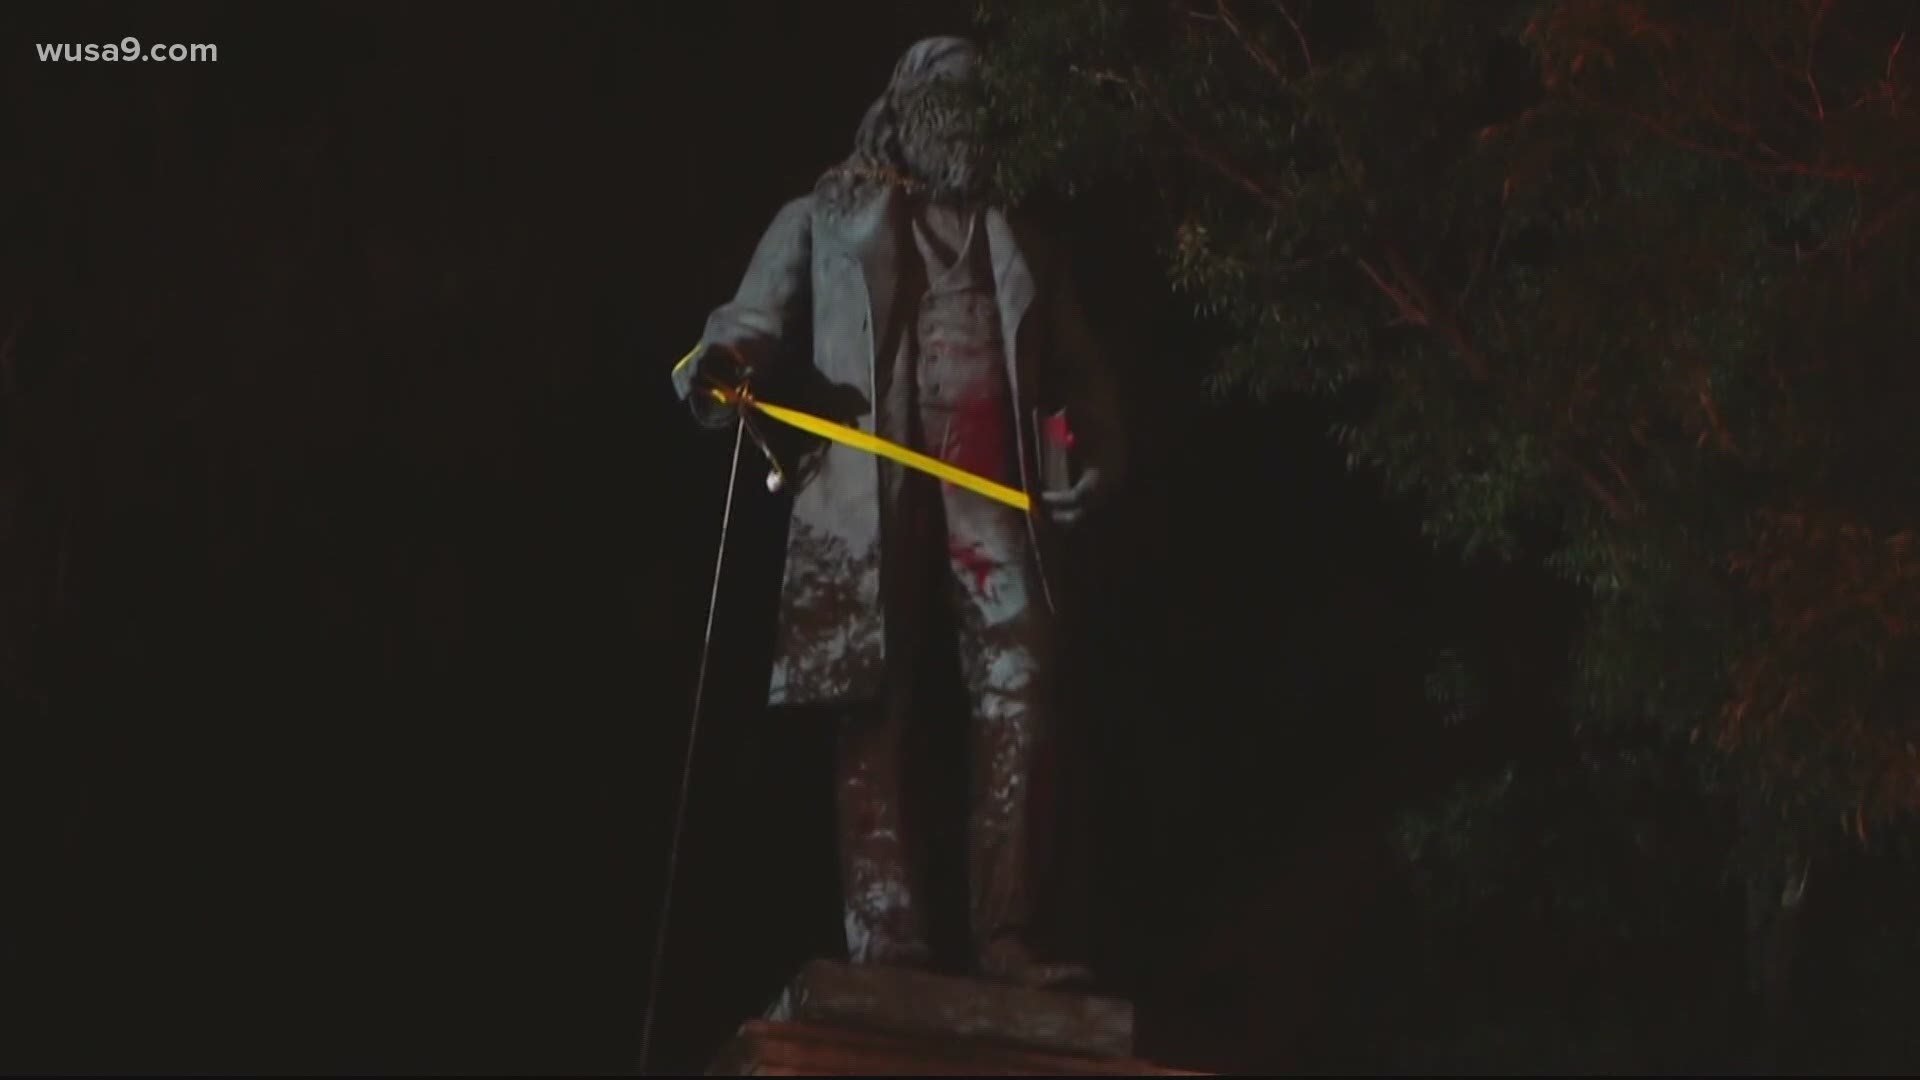 The Pike statue, which has been the center of dozens of protests in D.C. over the years, was one of the statues destroyed by protesters in June.